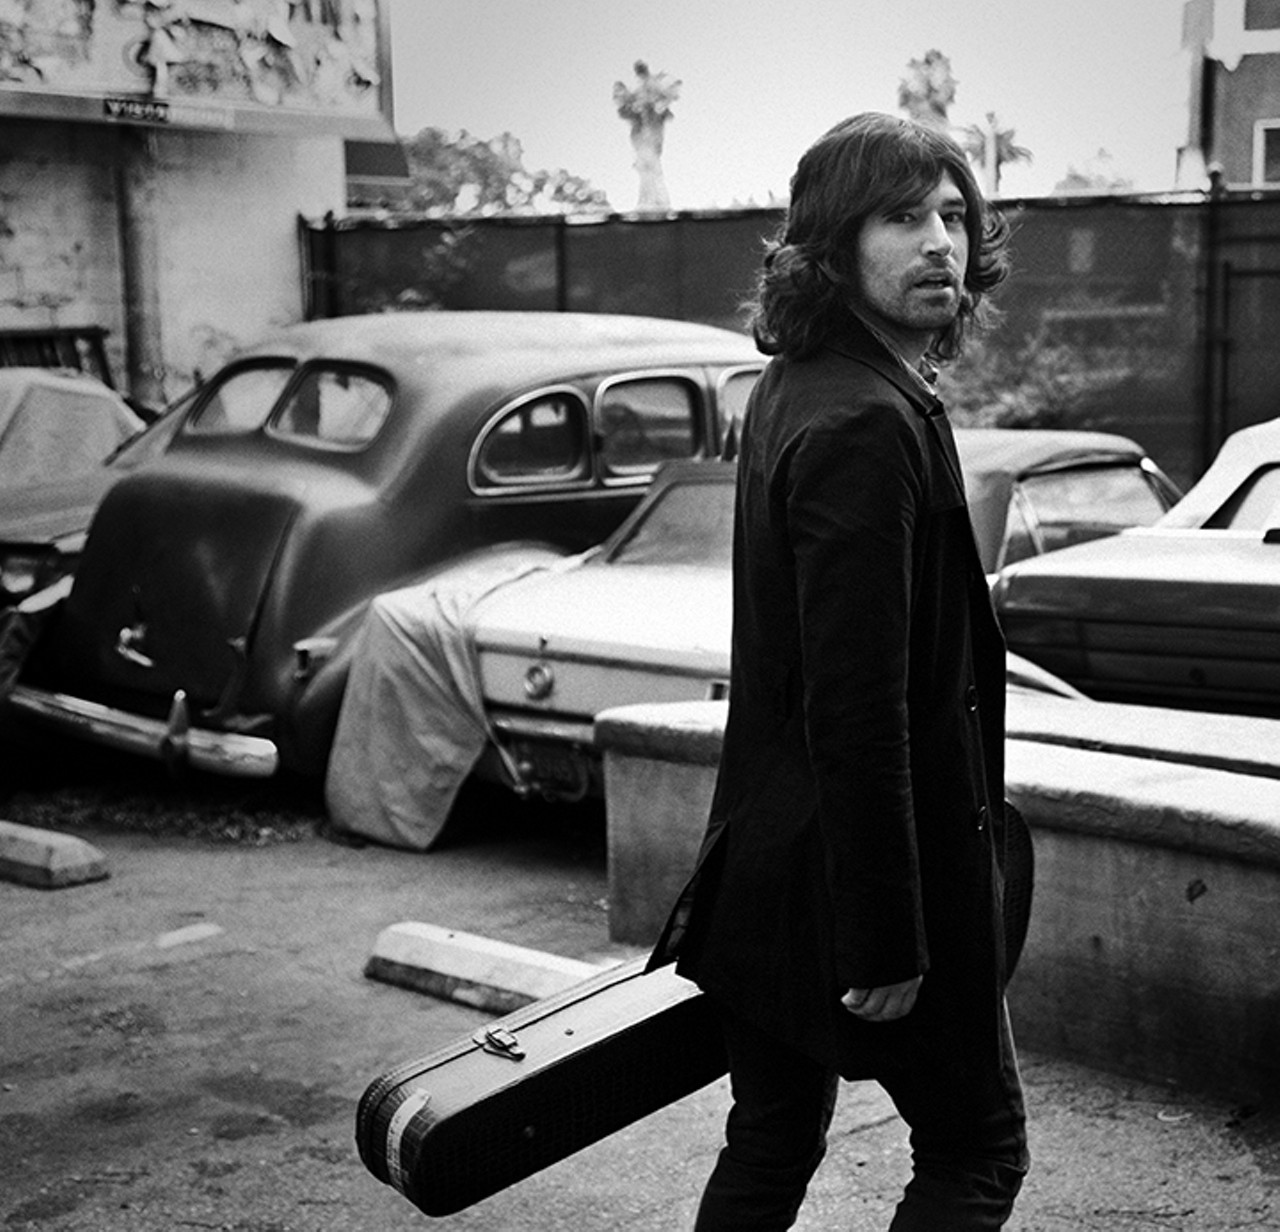 Wednesday, Jan. 23Pete Yorn at the Social